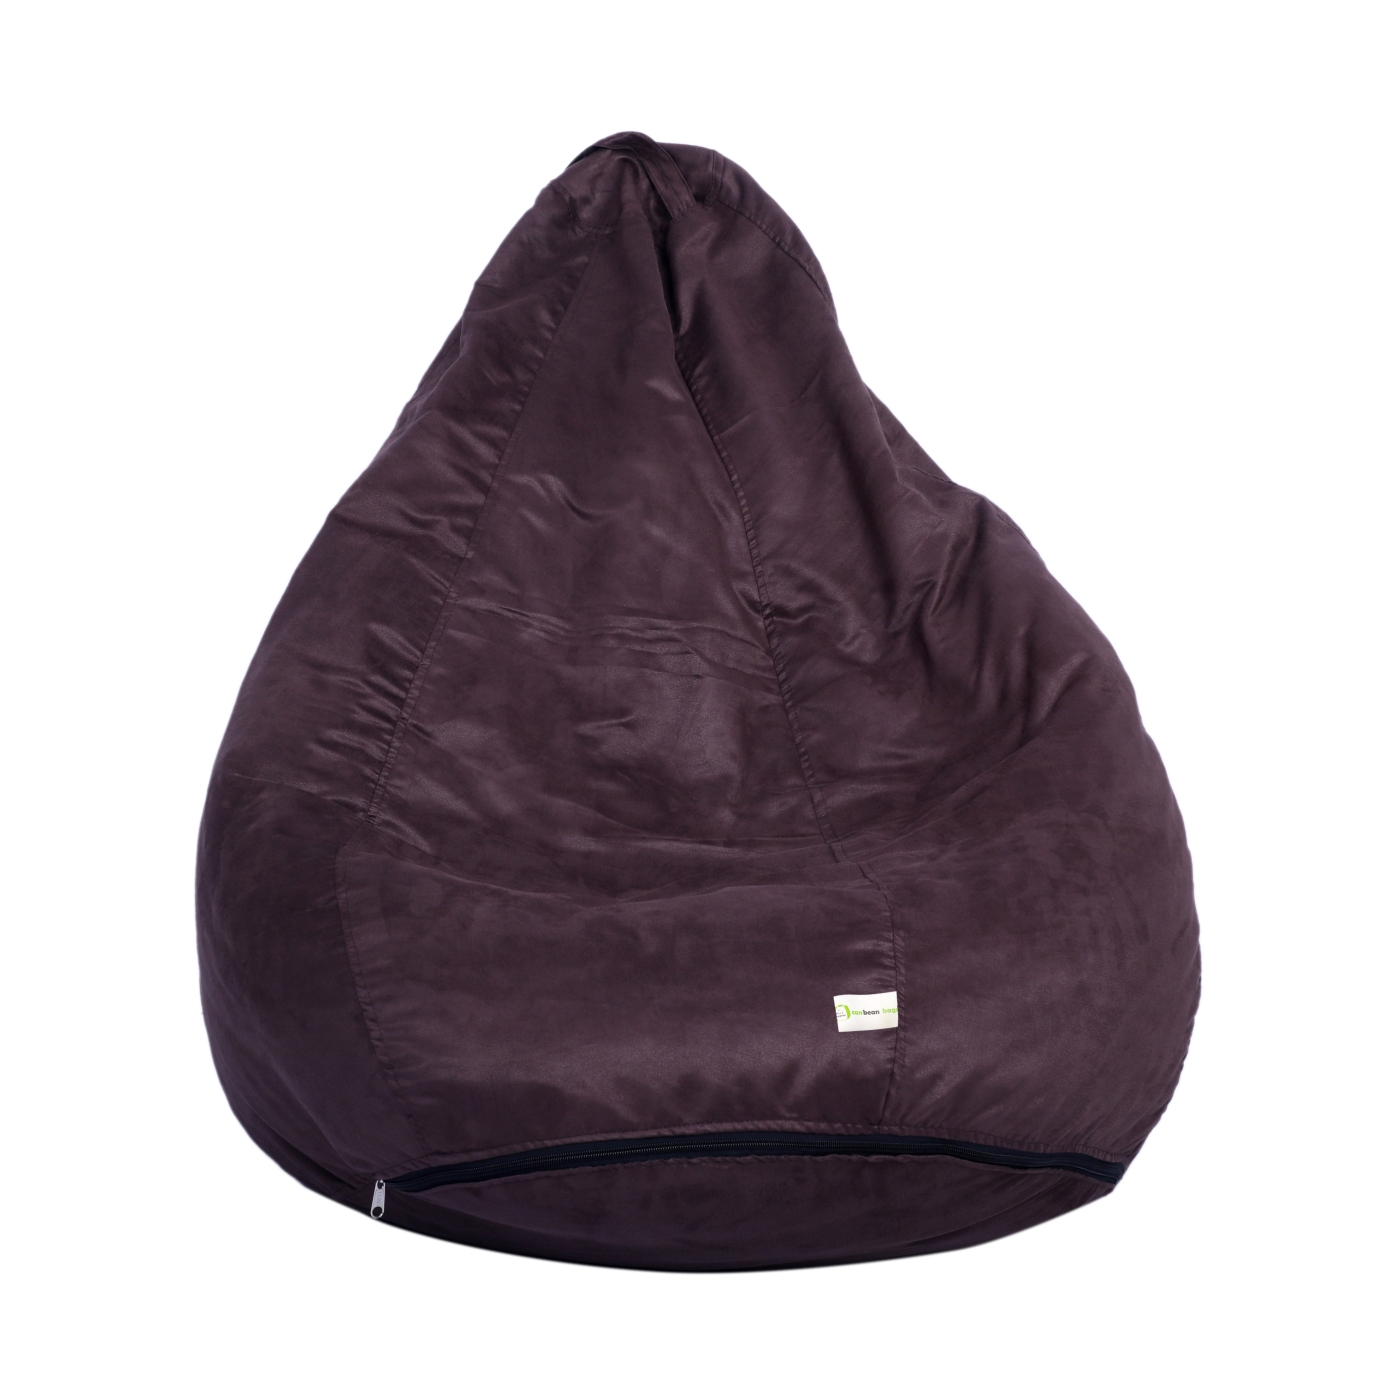 Can Bean Bags Suede Brown With Footstool Bean Bag  